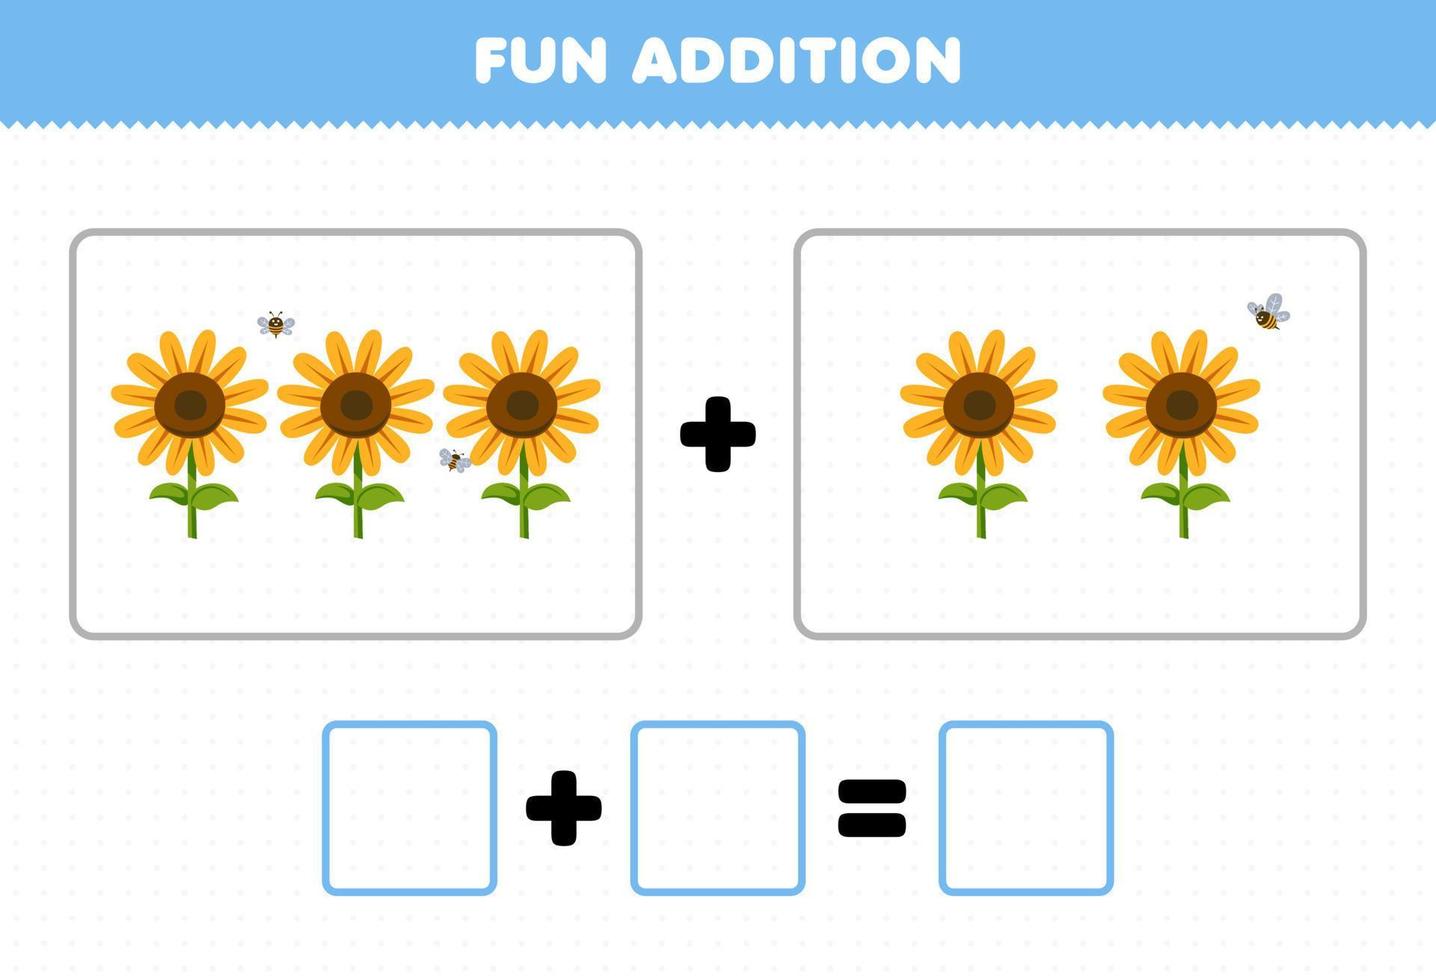 Education game for children fun addition by counting cute cartoon sunflower and bee pictures printable farm worksheet vector